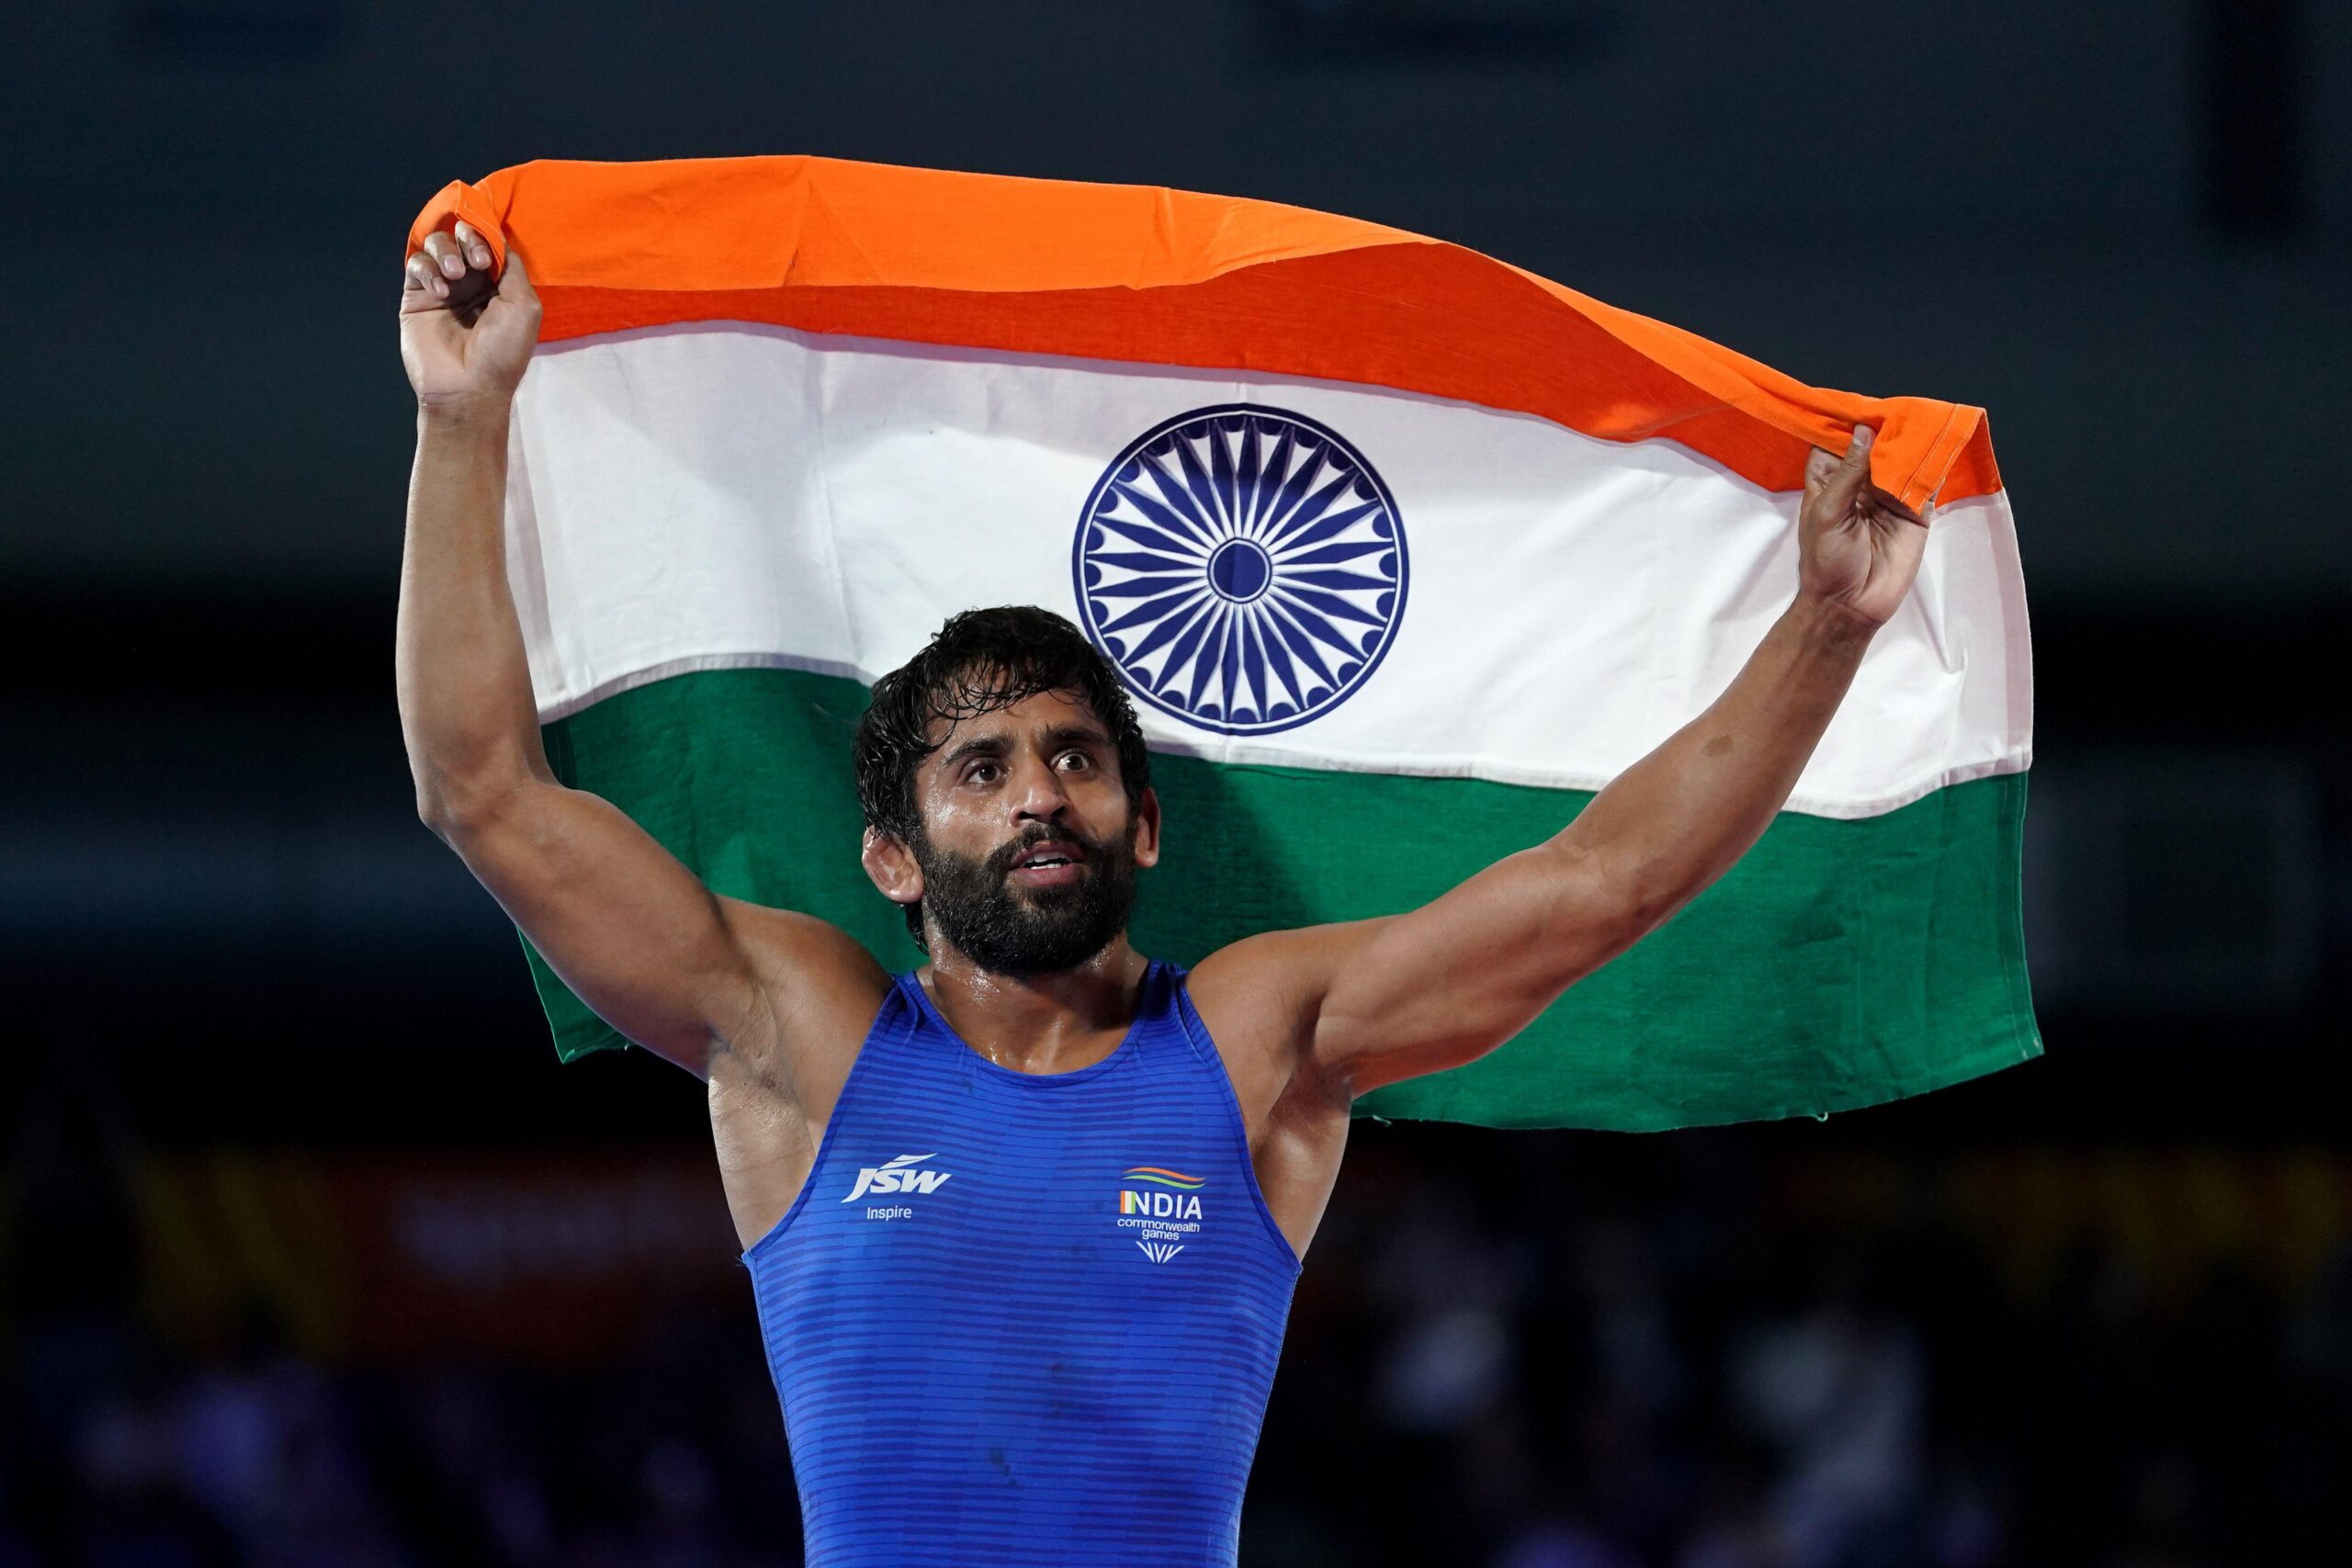 Bajrang Punia suspended for skipping dope test